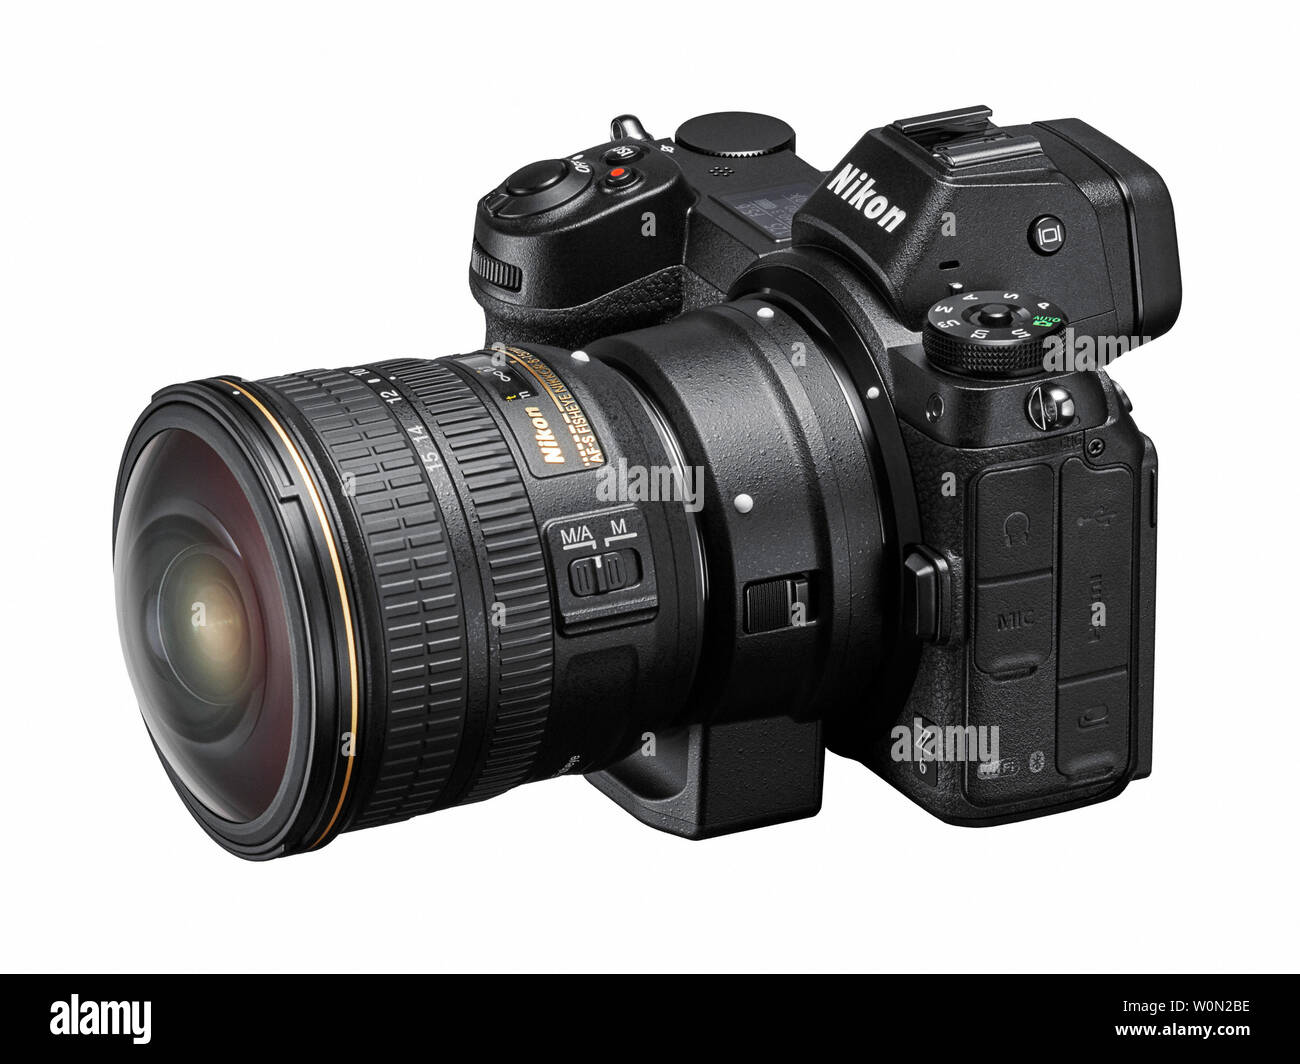 Nikon Inc. announced on August 23, 2018, the release of its full-frame Nikon  Z 6 mirrorless camera, as well as NIKKOR Z lenses, which feature a new,  larger-diameter mount. The Z 6